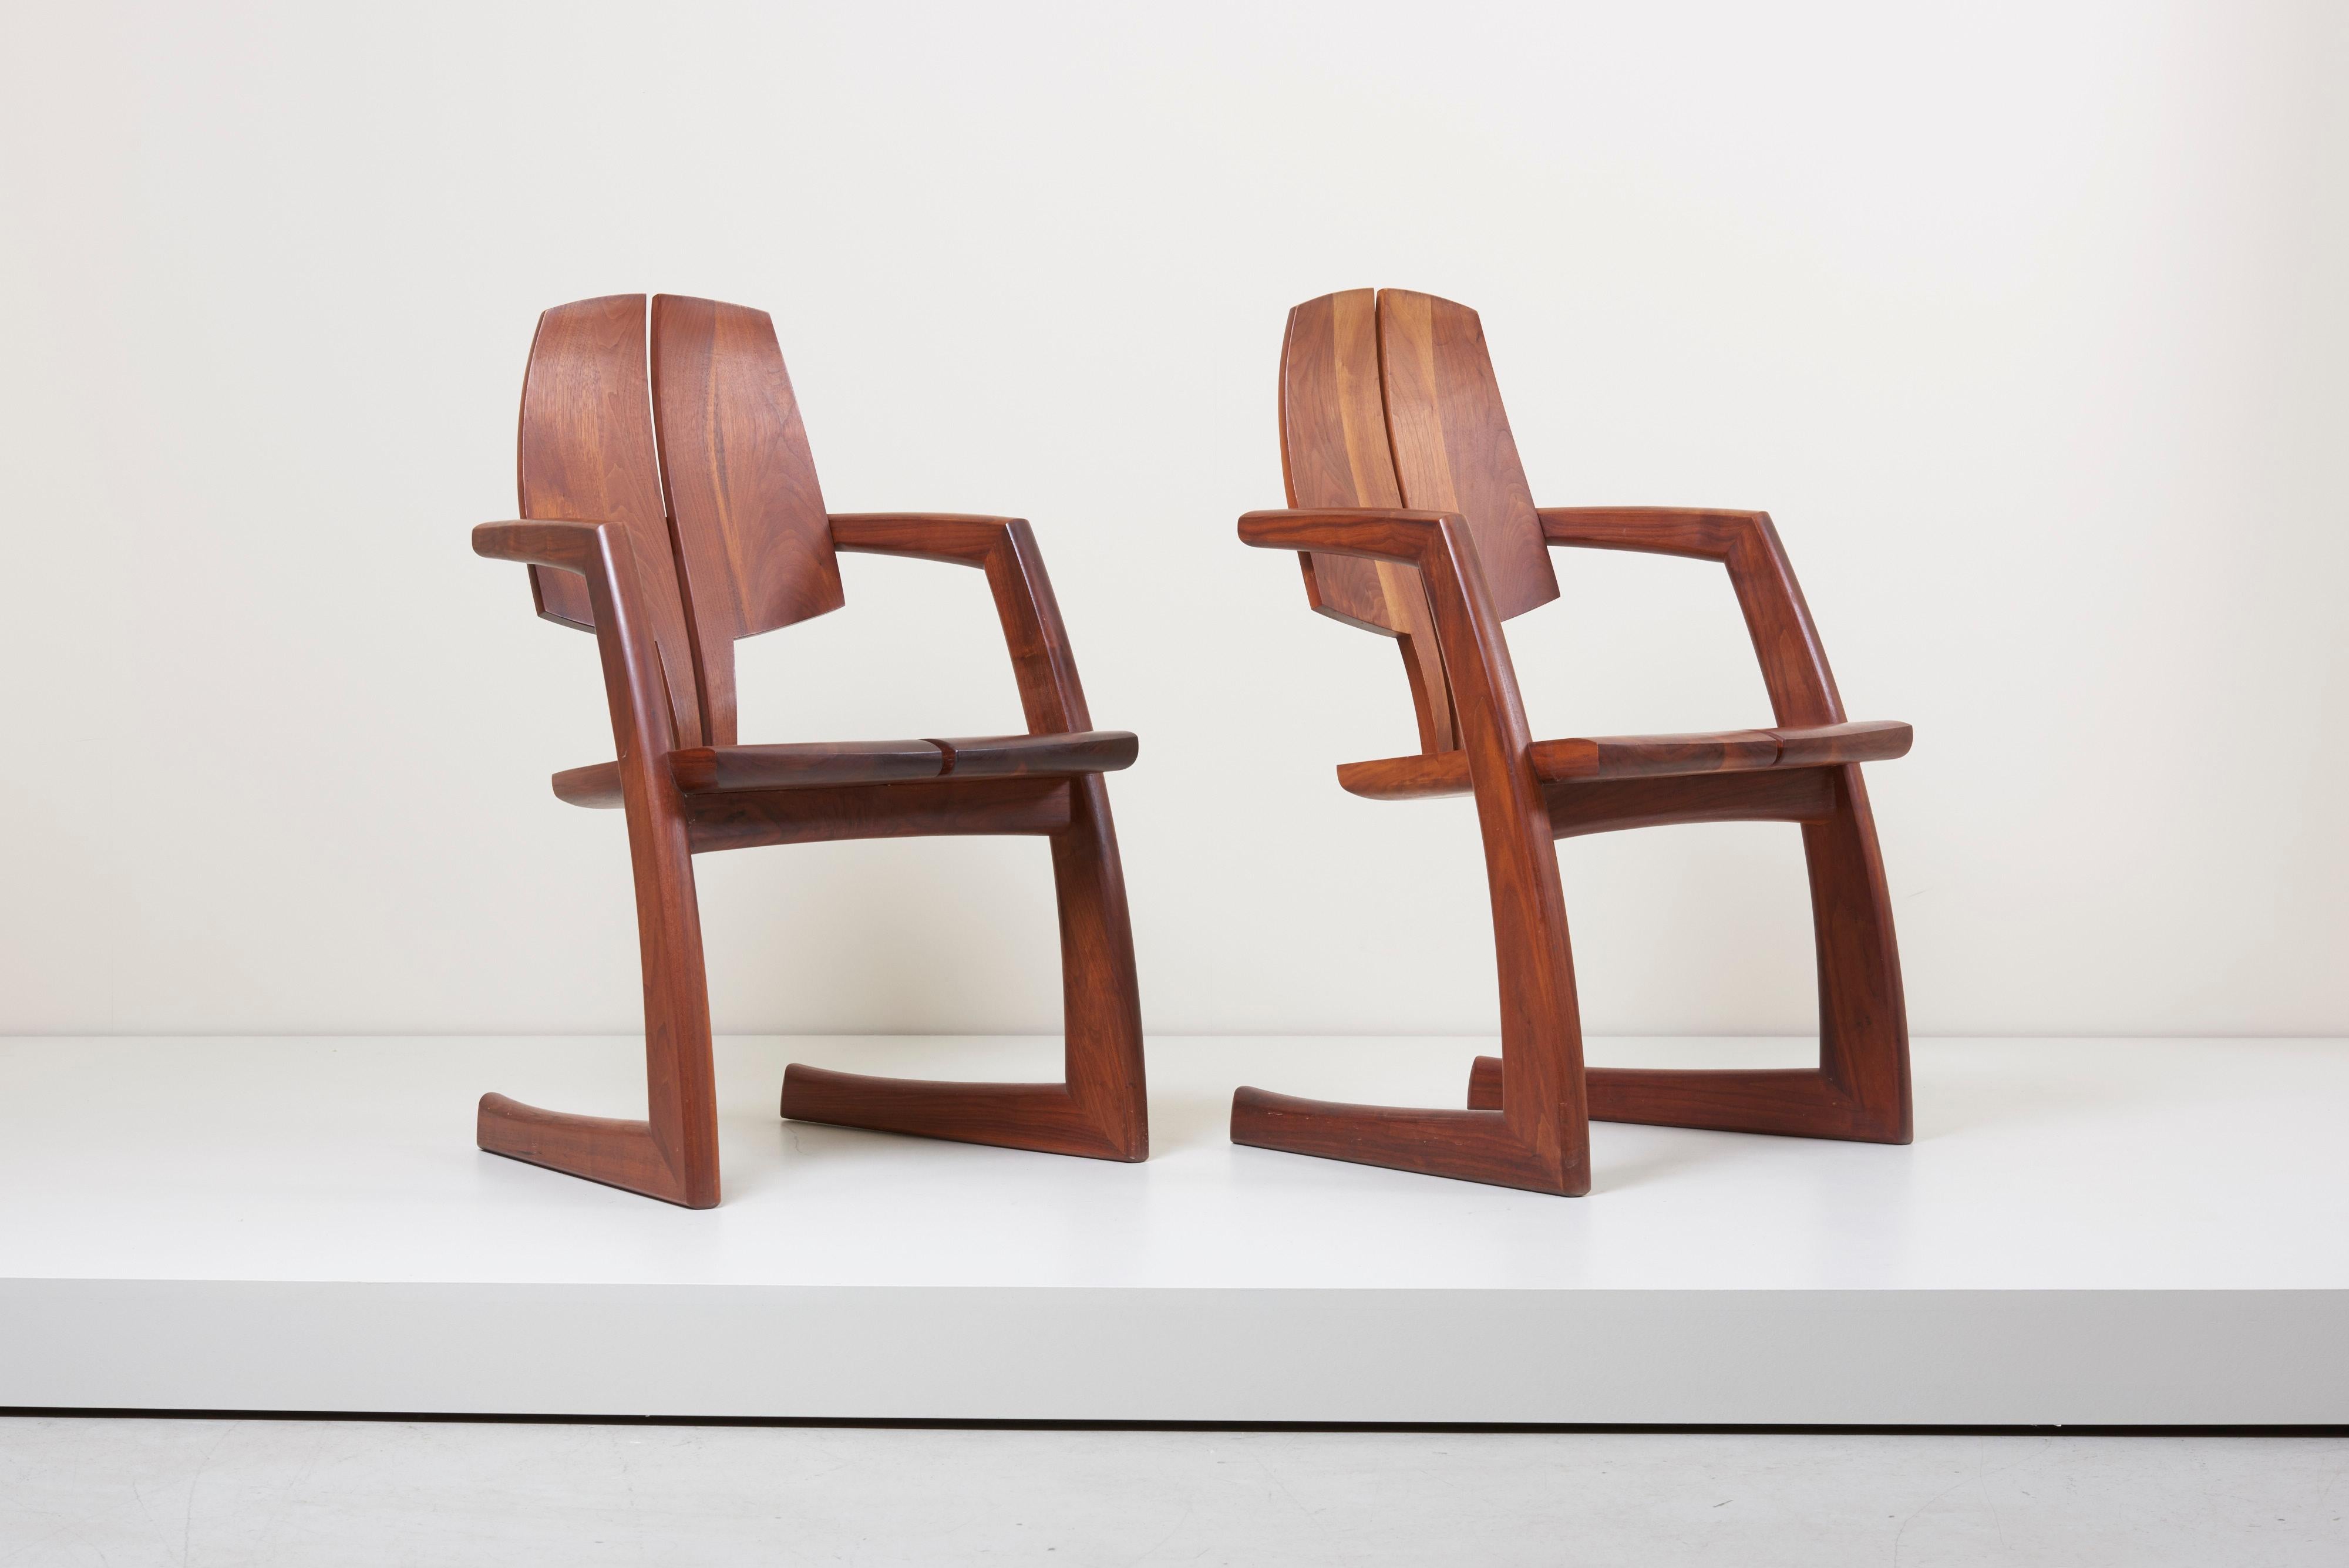 This pair of wooden American craft chairs is designed by Woodworker H. Wayne Raab. The chairs have an individual design and are made of solid walnut. They are heavy, solid, and very well made, with no looseness or wobbliness. Excellent original